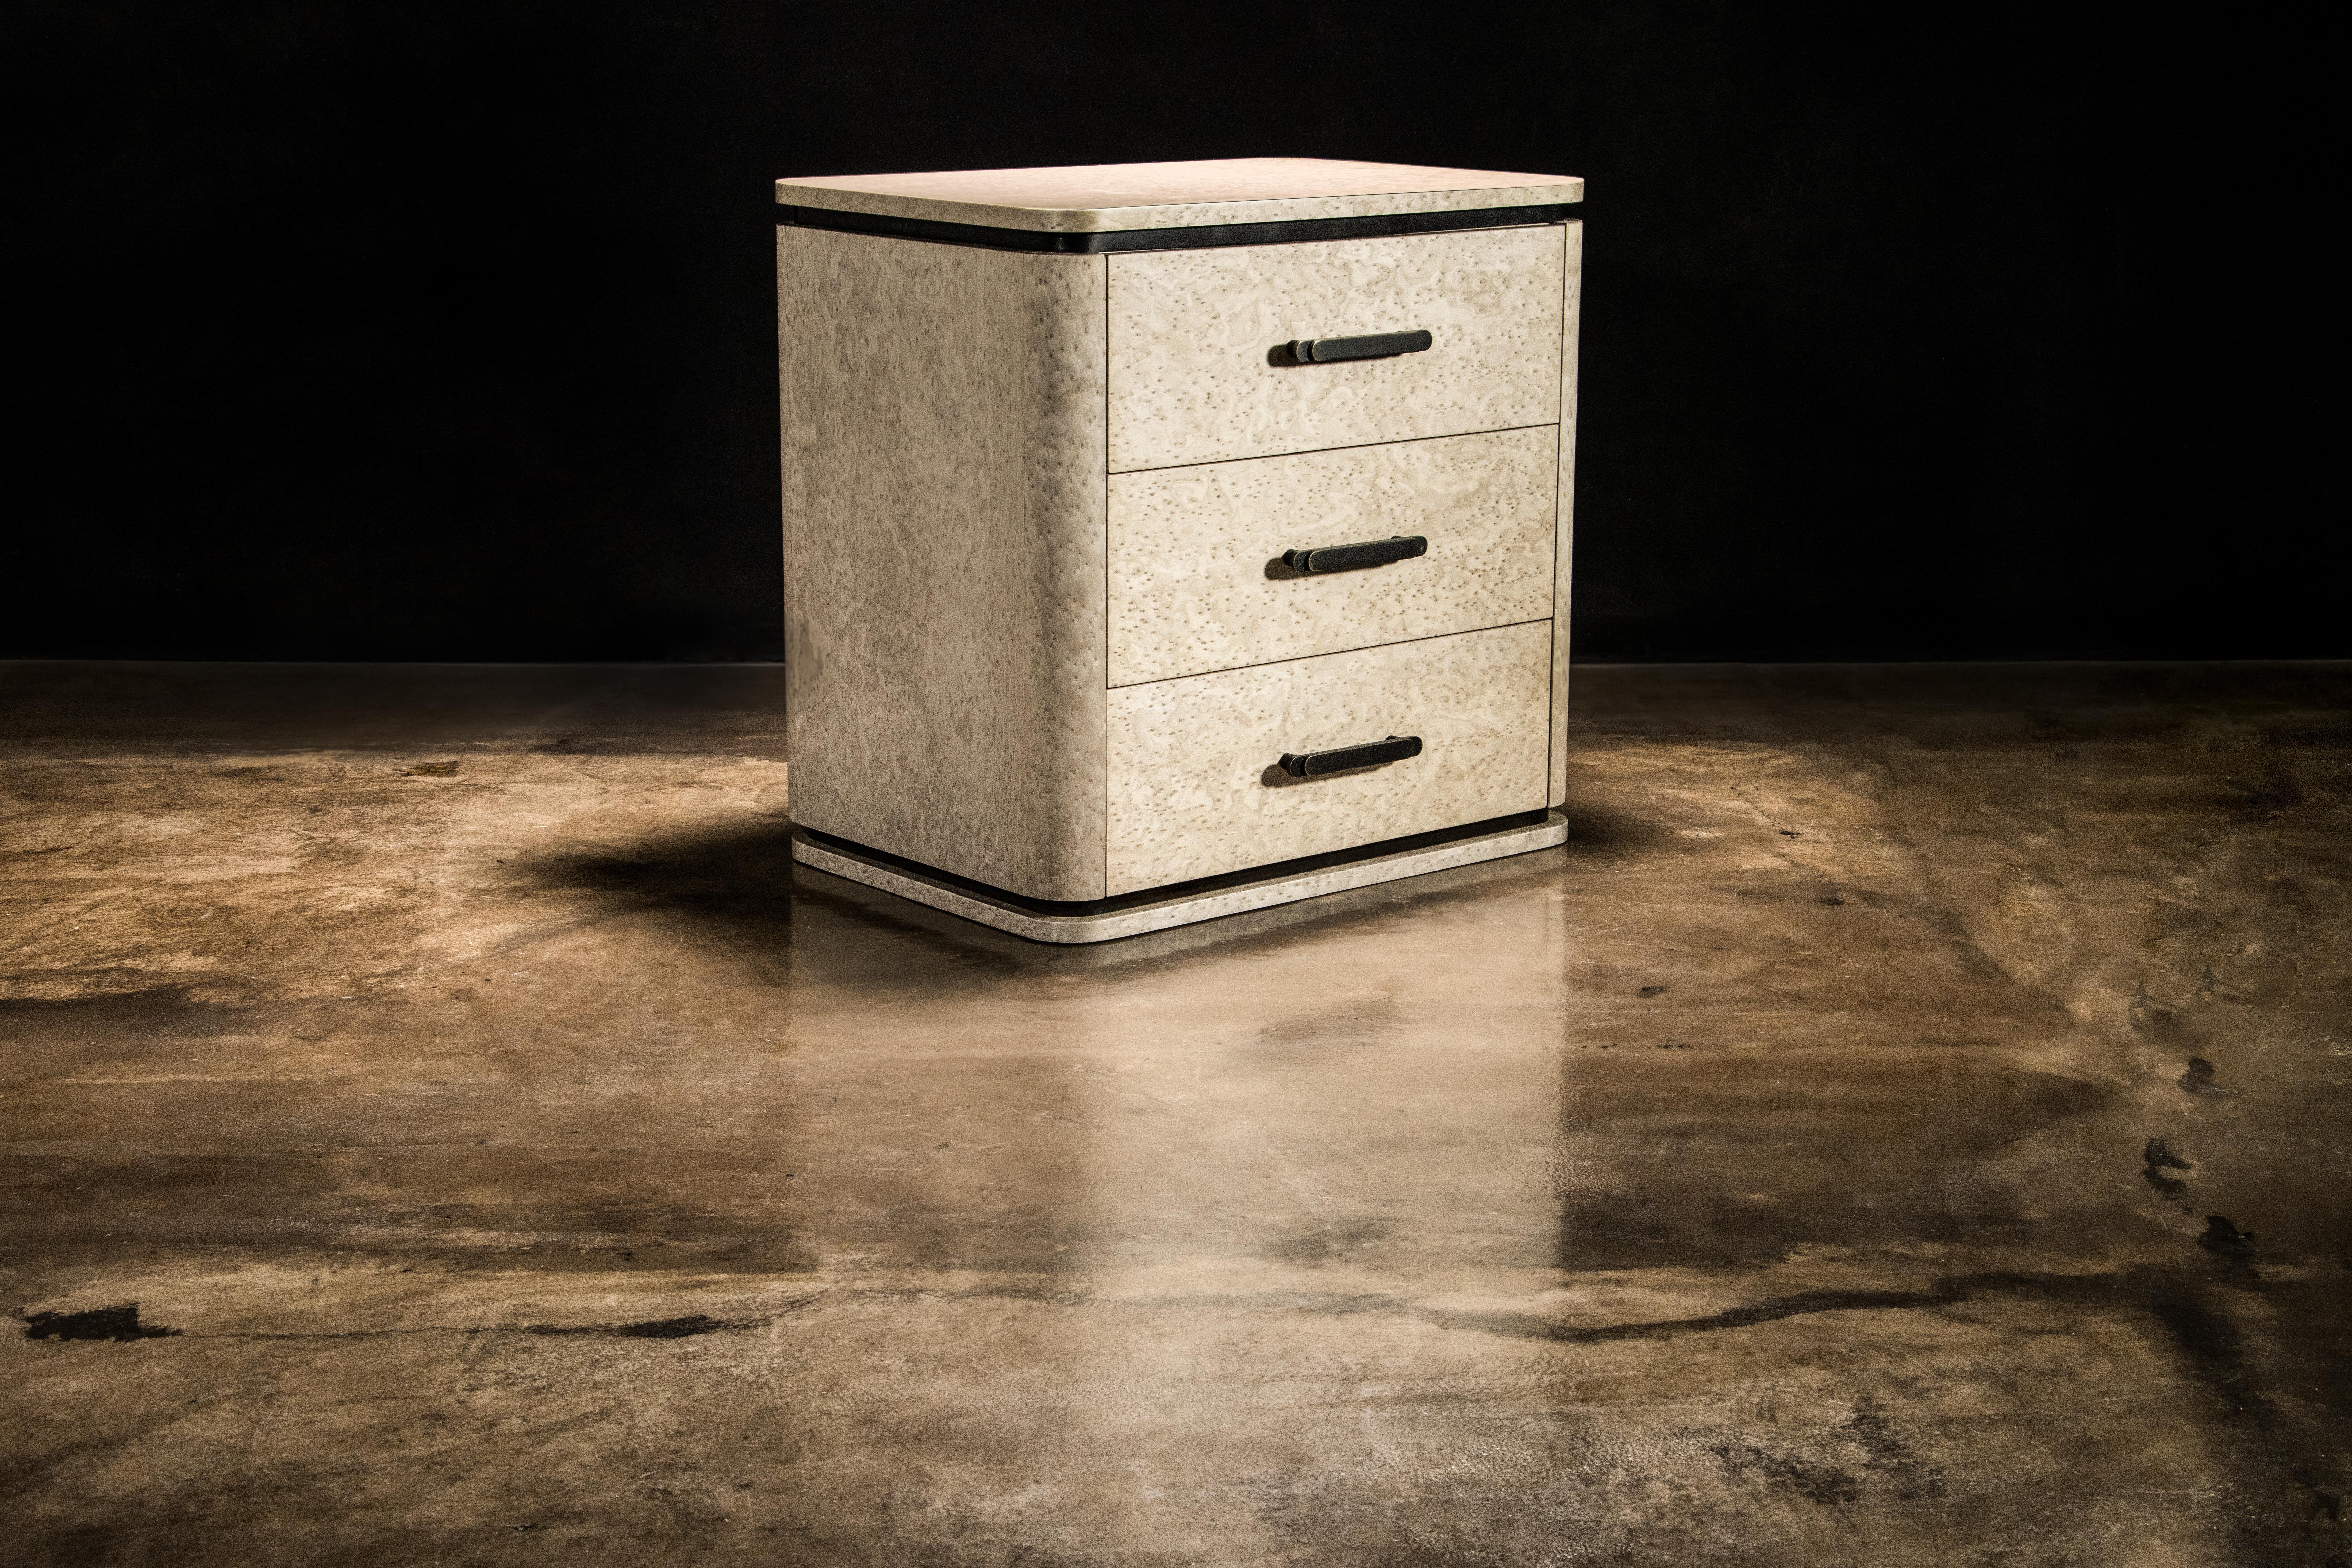 Elena Modern Bedside Table, shown in Gray Birdseye Maple & Bronze from Costantini

Measurements are 25.5